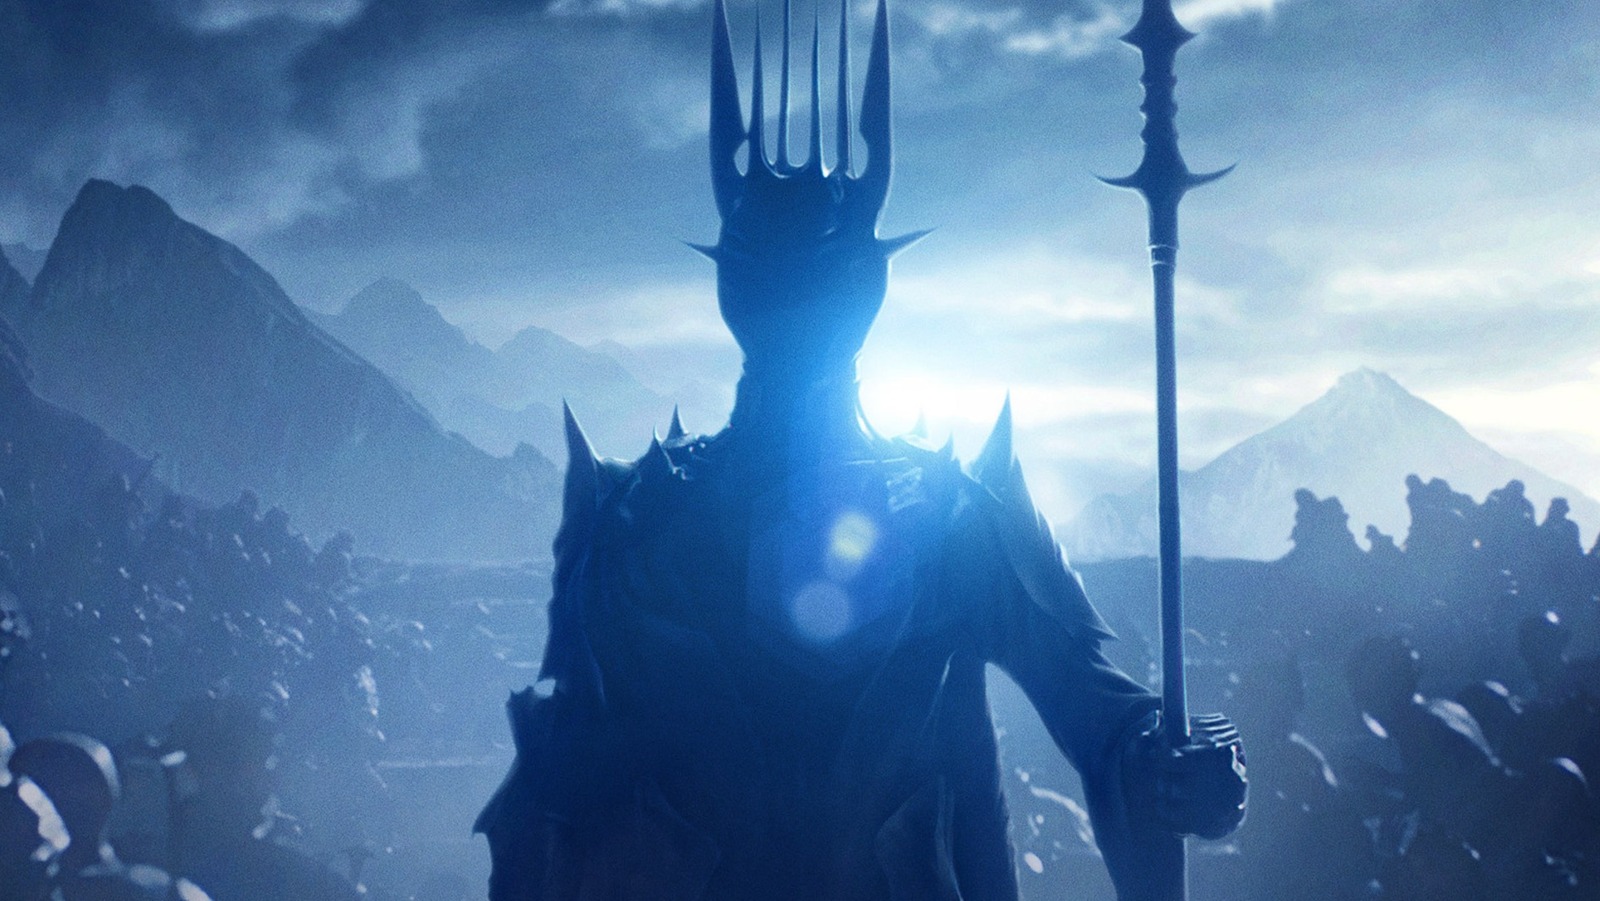 Latest Sauron 'Halbrand' Rumours For The Rings Of Power Season 2  (Exclusive) - Fellowship of Fans